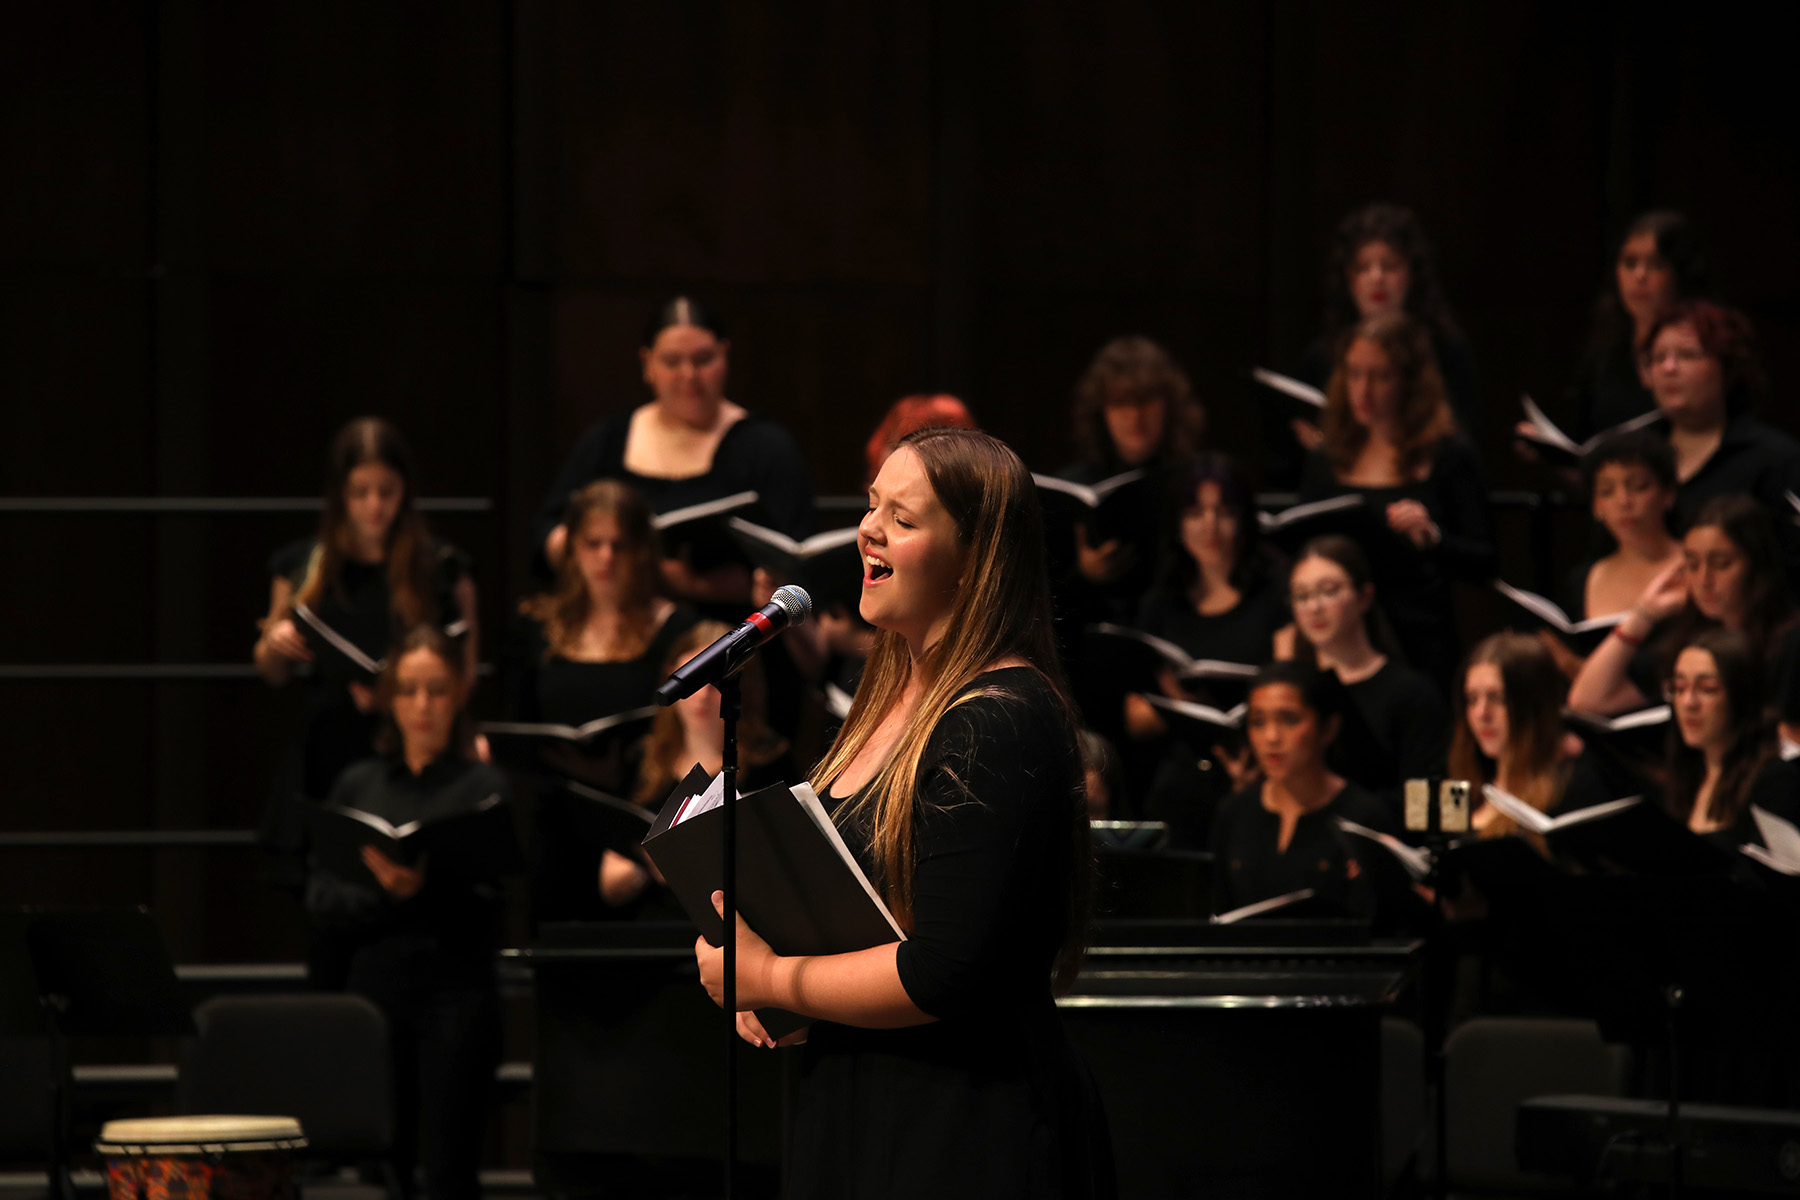 Nicole Van Esselstyn performs a solo during the Choral Ensemble Camp Final Performance. (Photo by Audra Weathers)